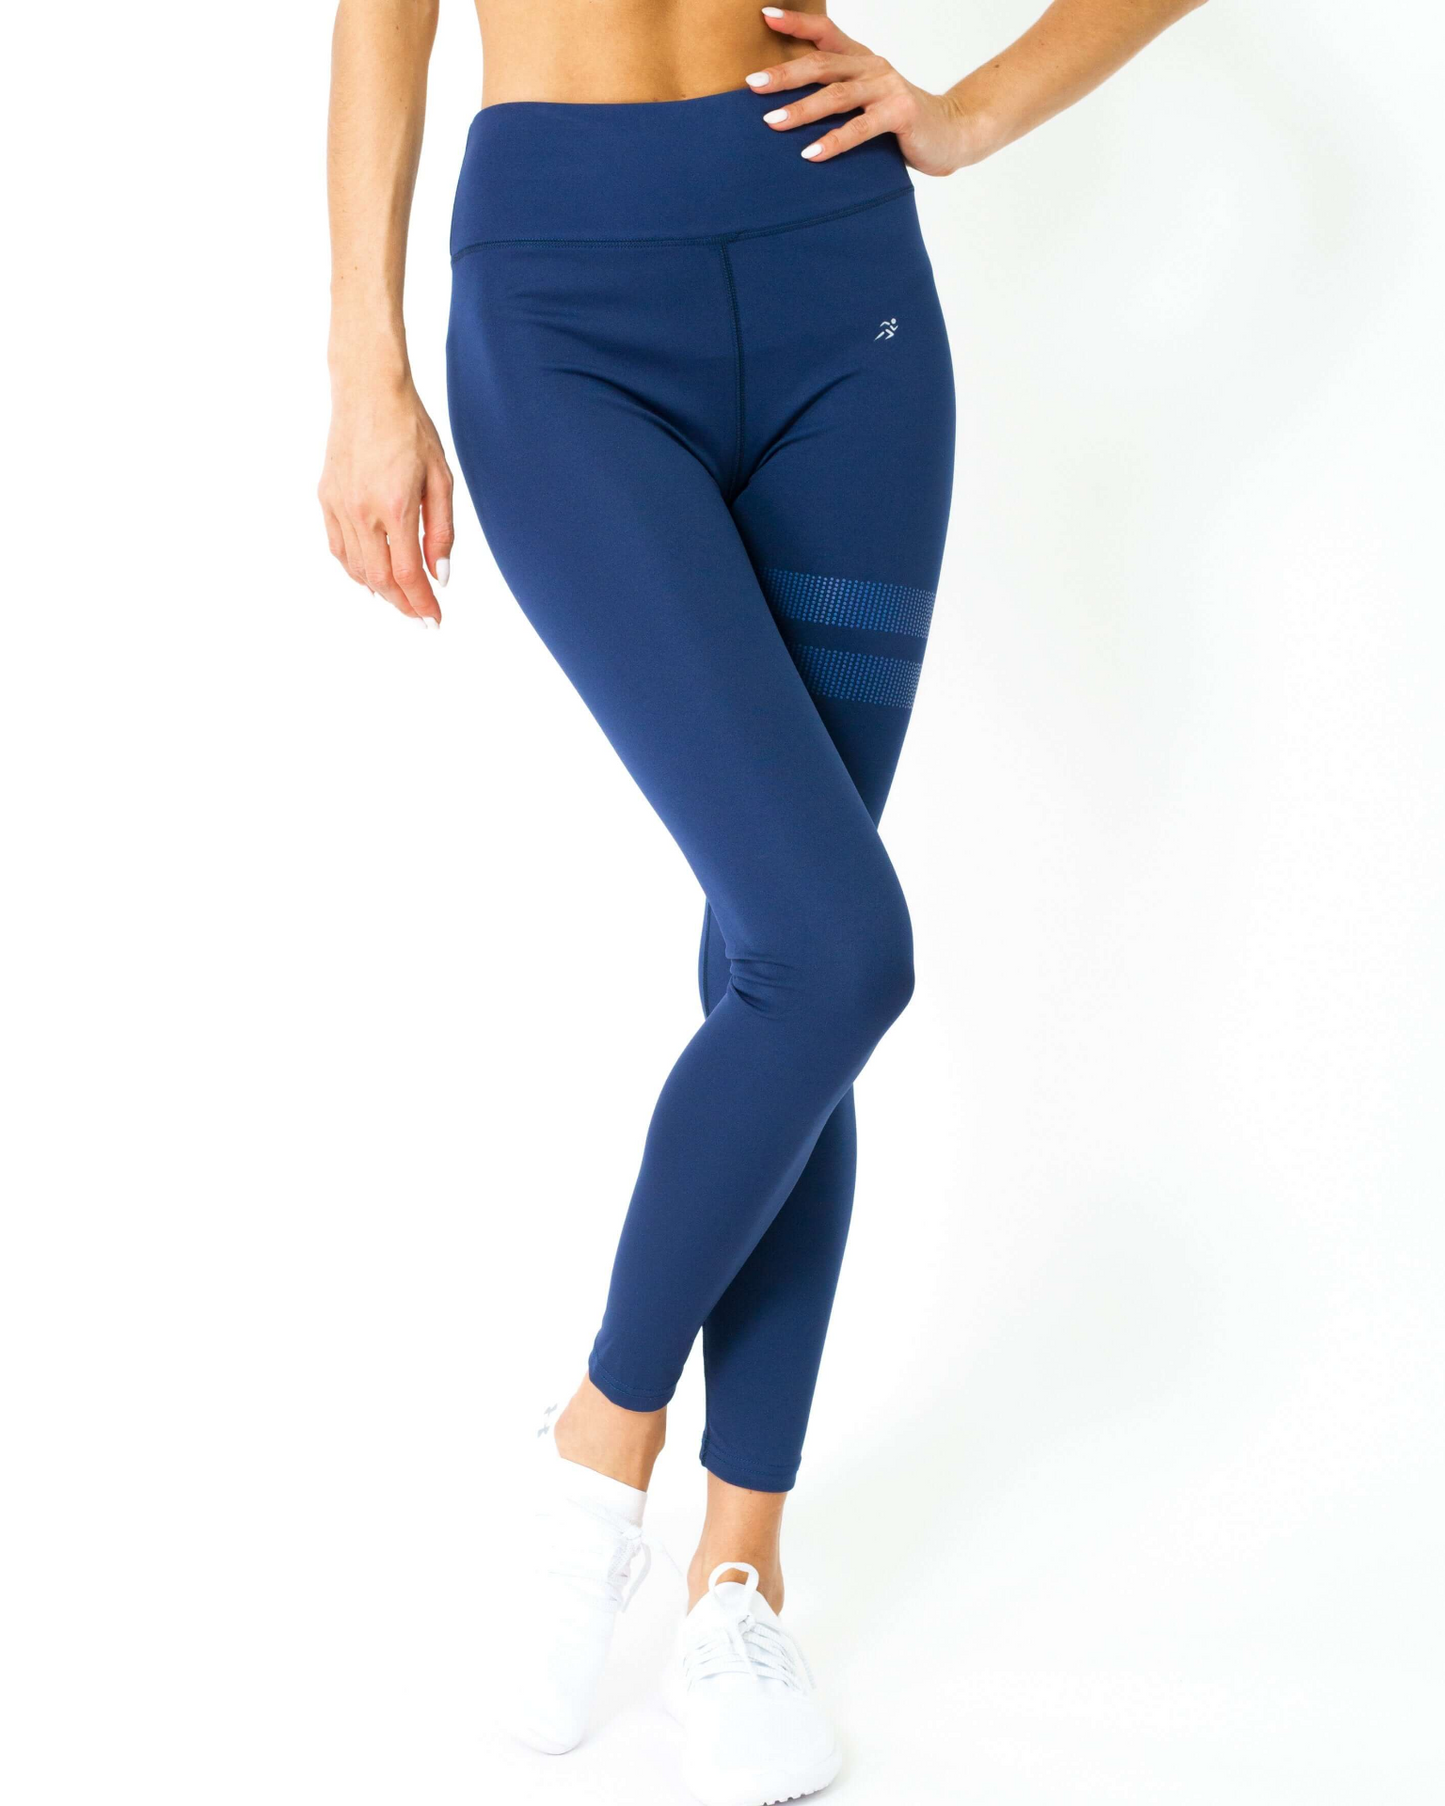 Ashton Athletic High-Waisted Leggings - Stylish and Sculpted Compression Fit